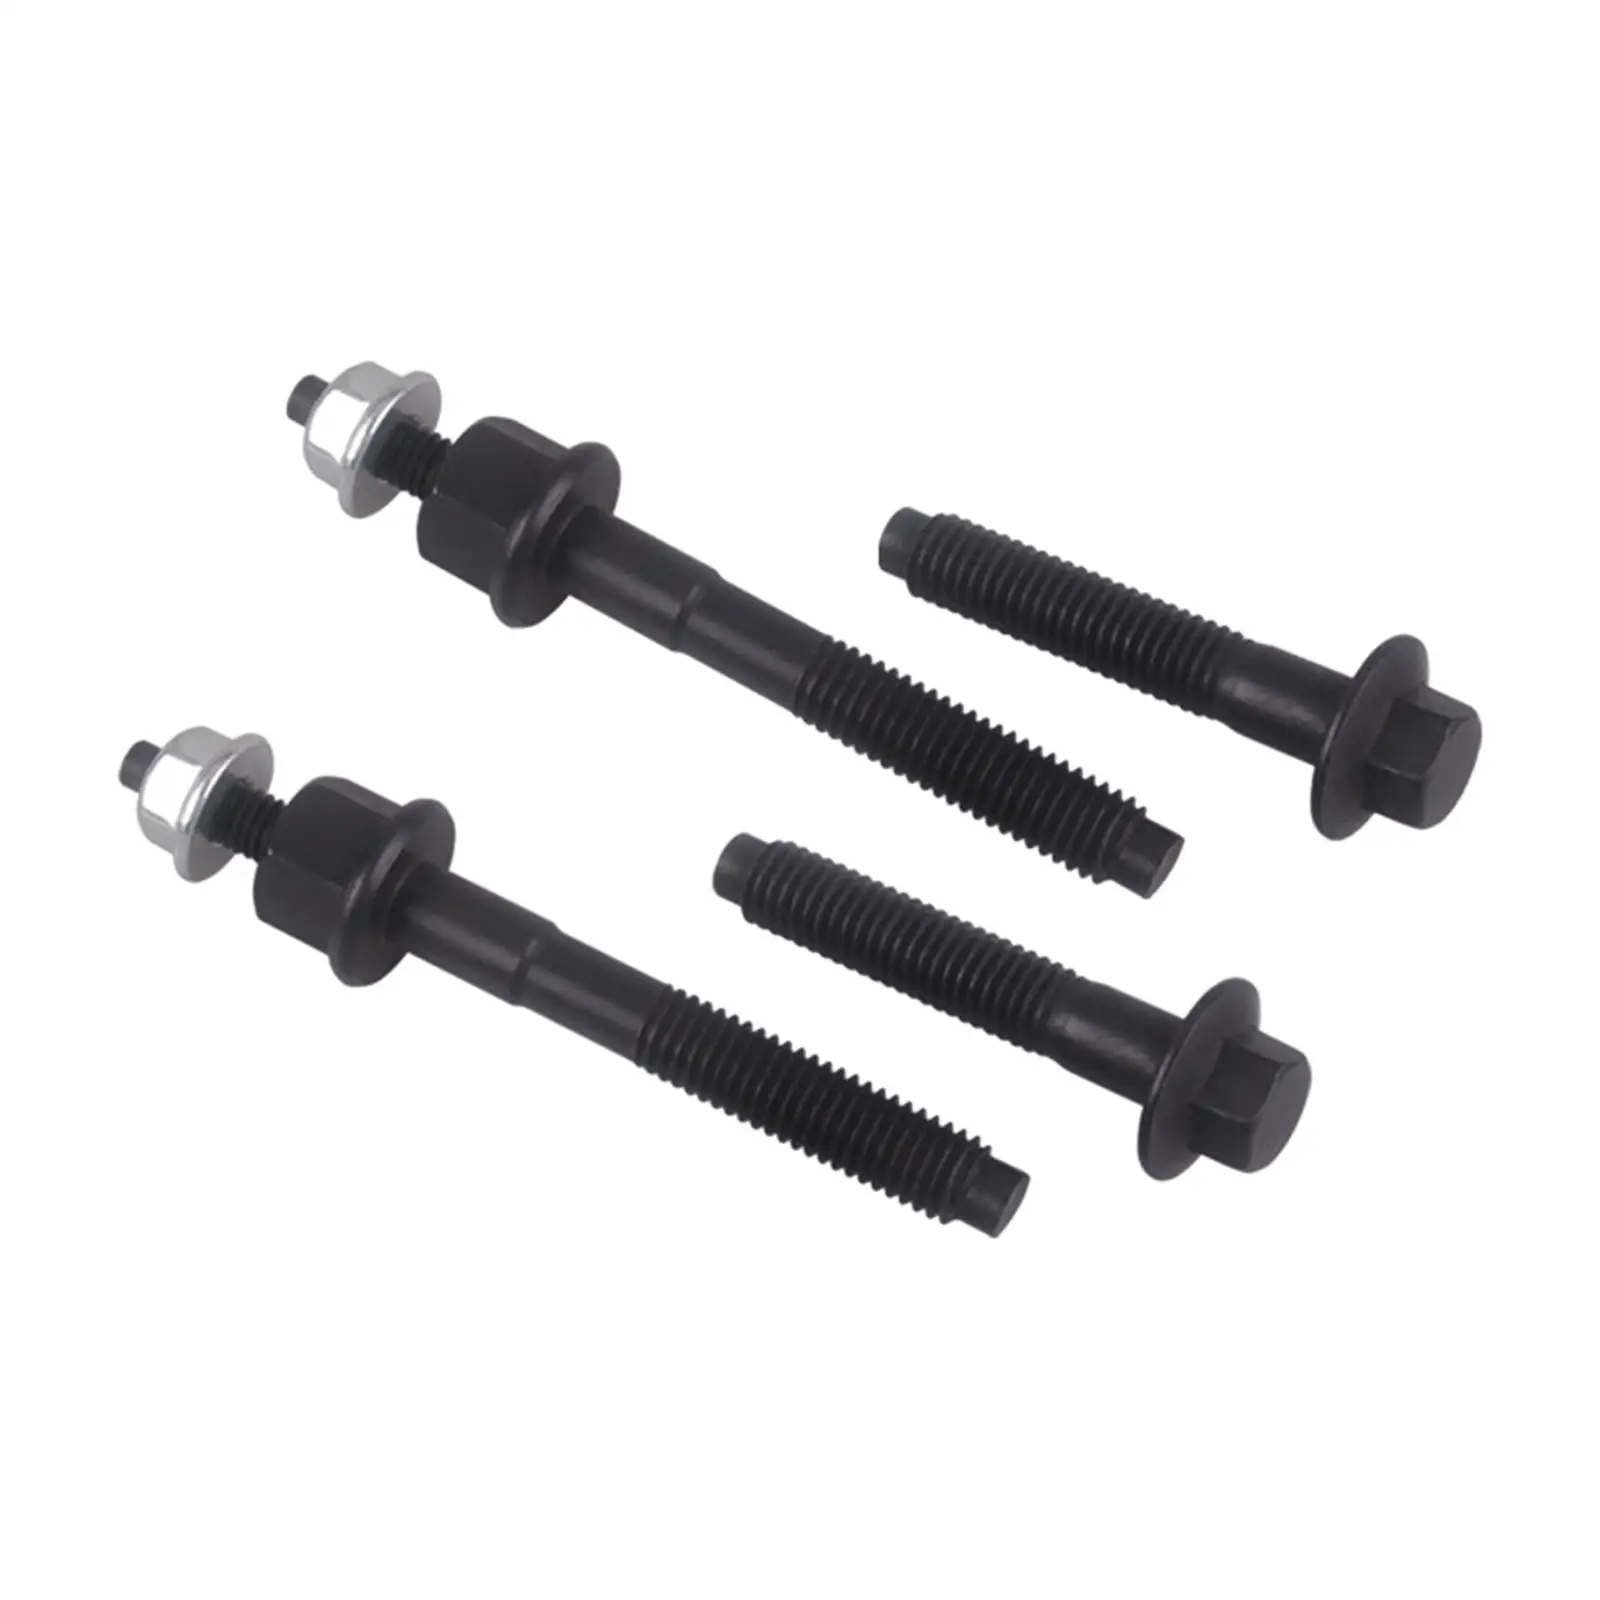 Exhaust Manifold Bolts and Nuts Easy Installation Spare Supplies Iron Replacement Parts for 1500 2500 3500 5.7L Engine Car